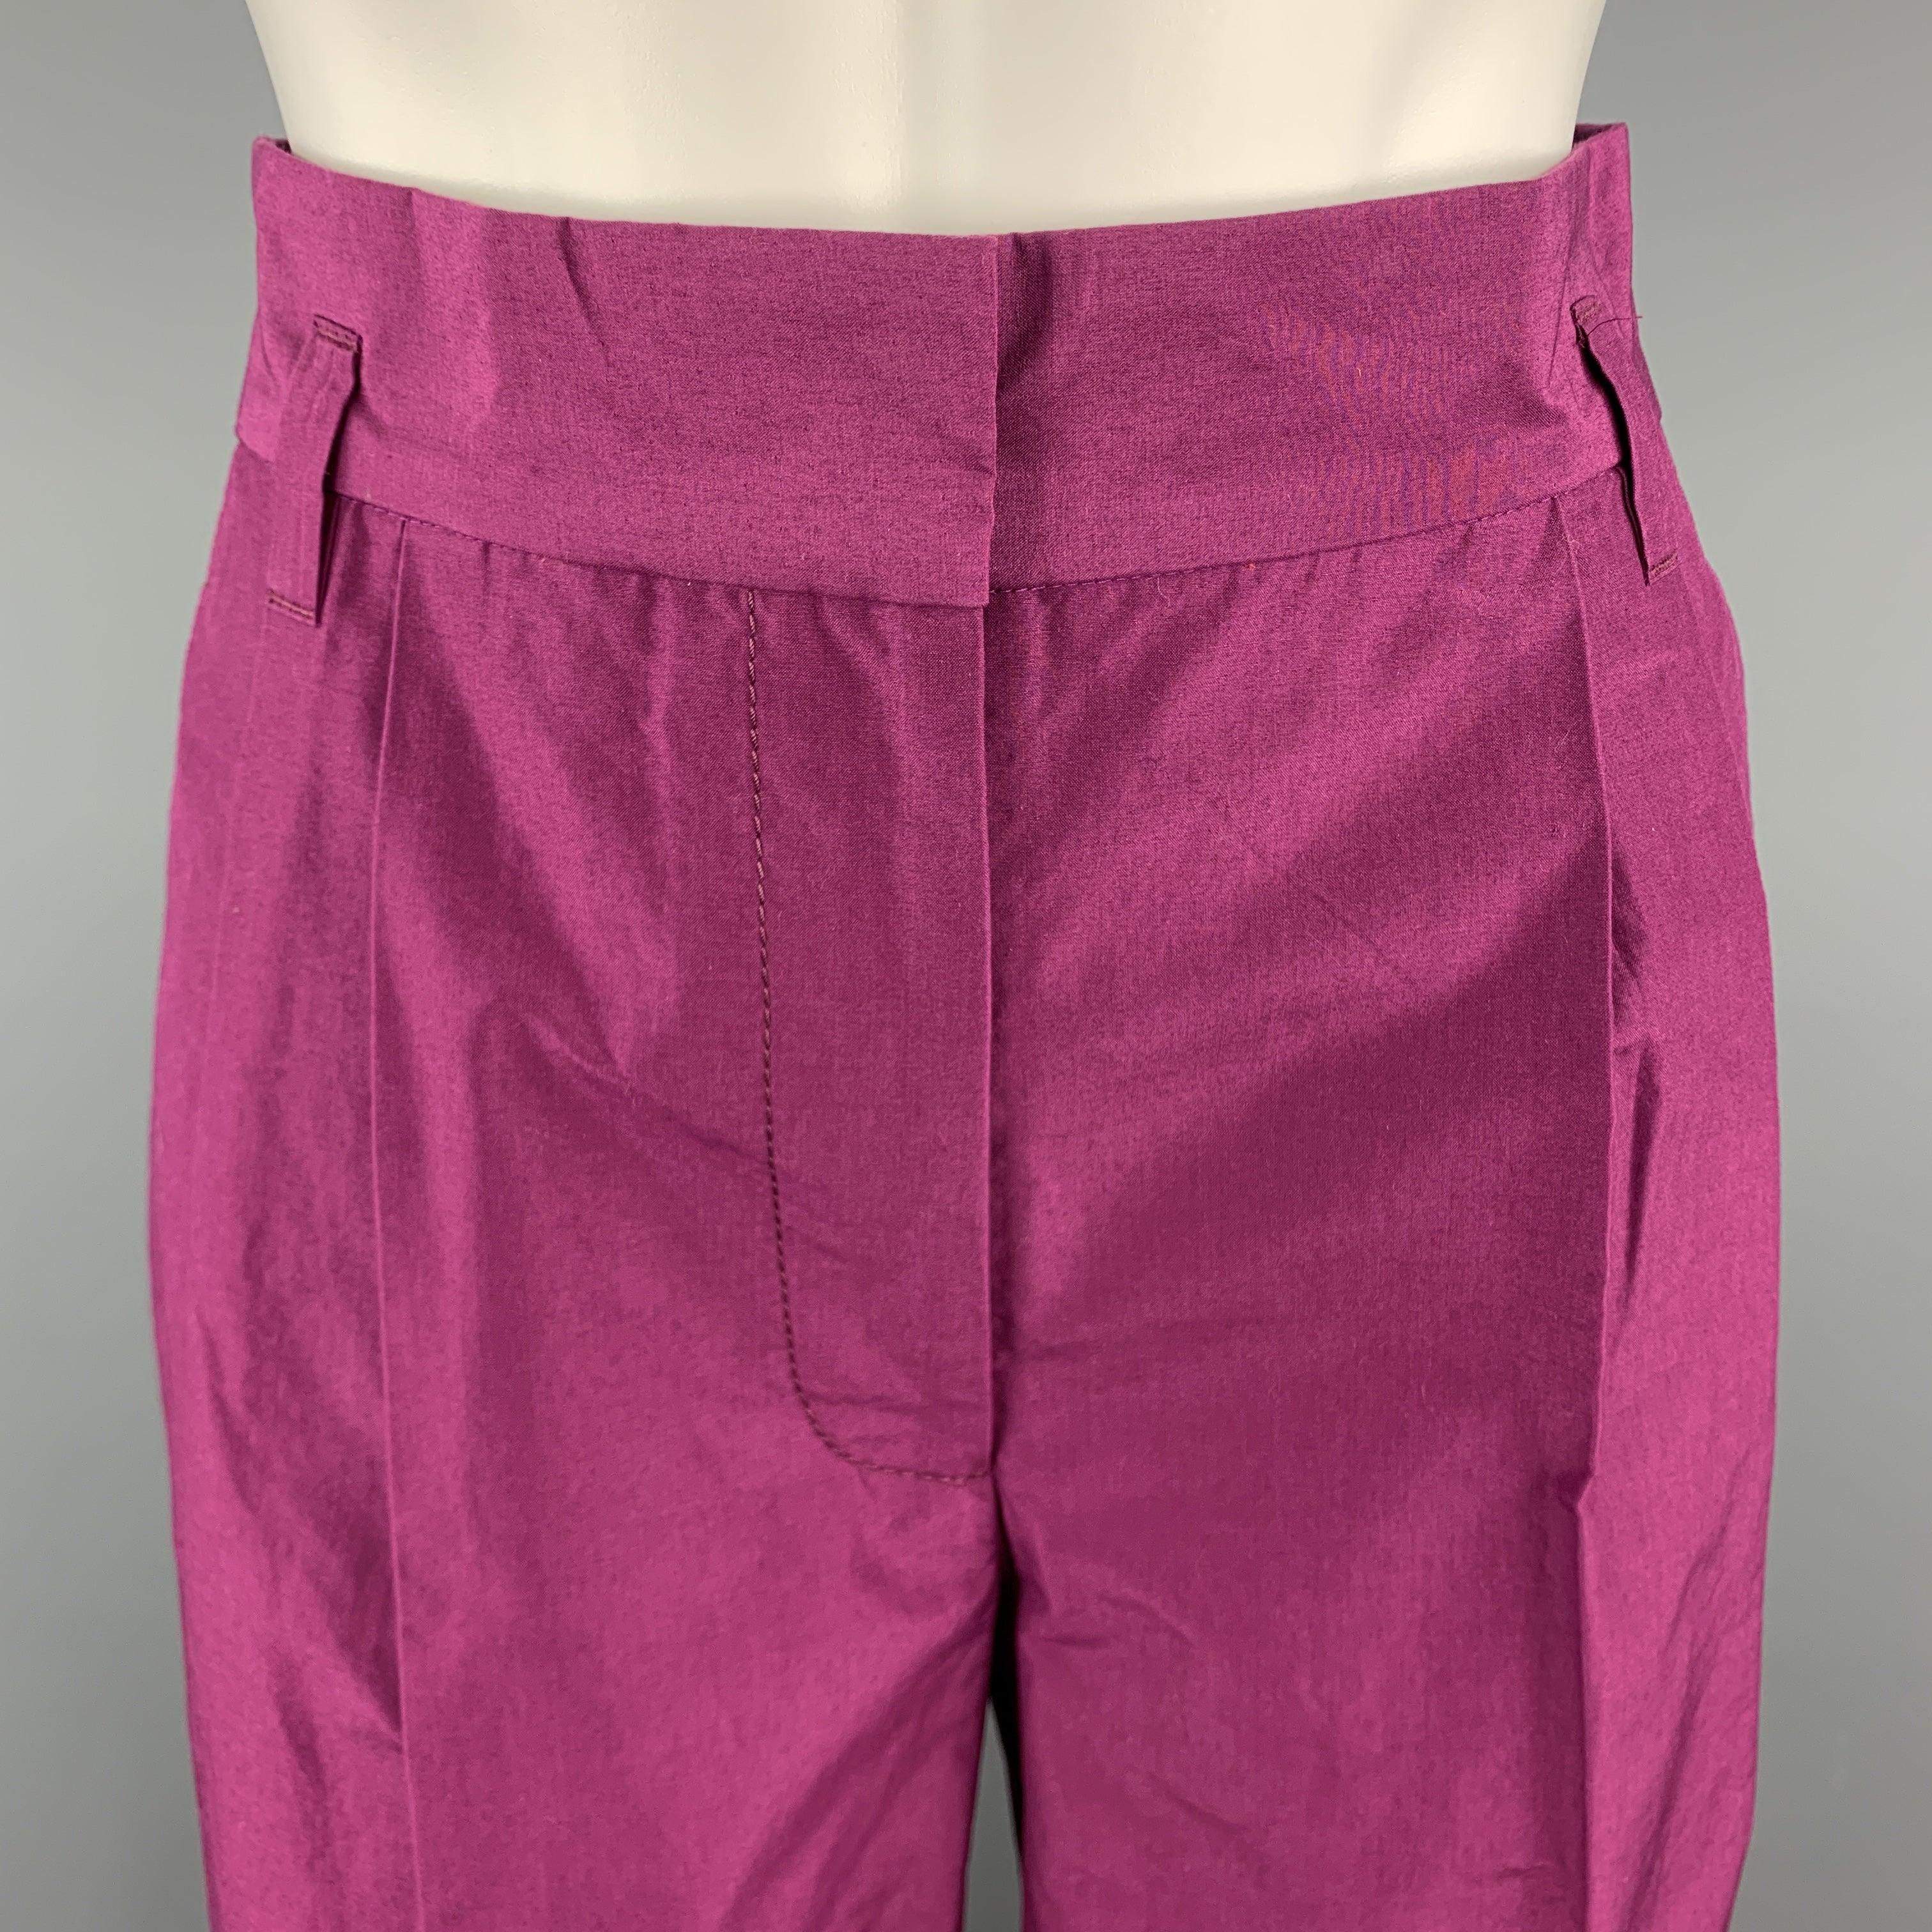 MARC JACOBS
Dress pants comes in a purple solid cotton material, with a high waist, a pleated front, belt loops, wide legs, zip fly, and seam and slit pockets. Made in USA.
New With Tags. 

Marked:   0 

Measurements: 
  Waist: 26 inches 
Rise: 11